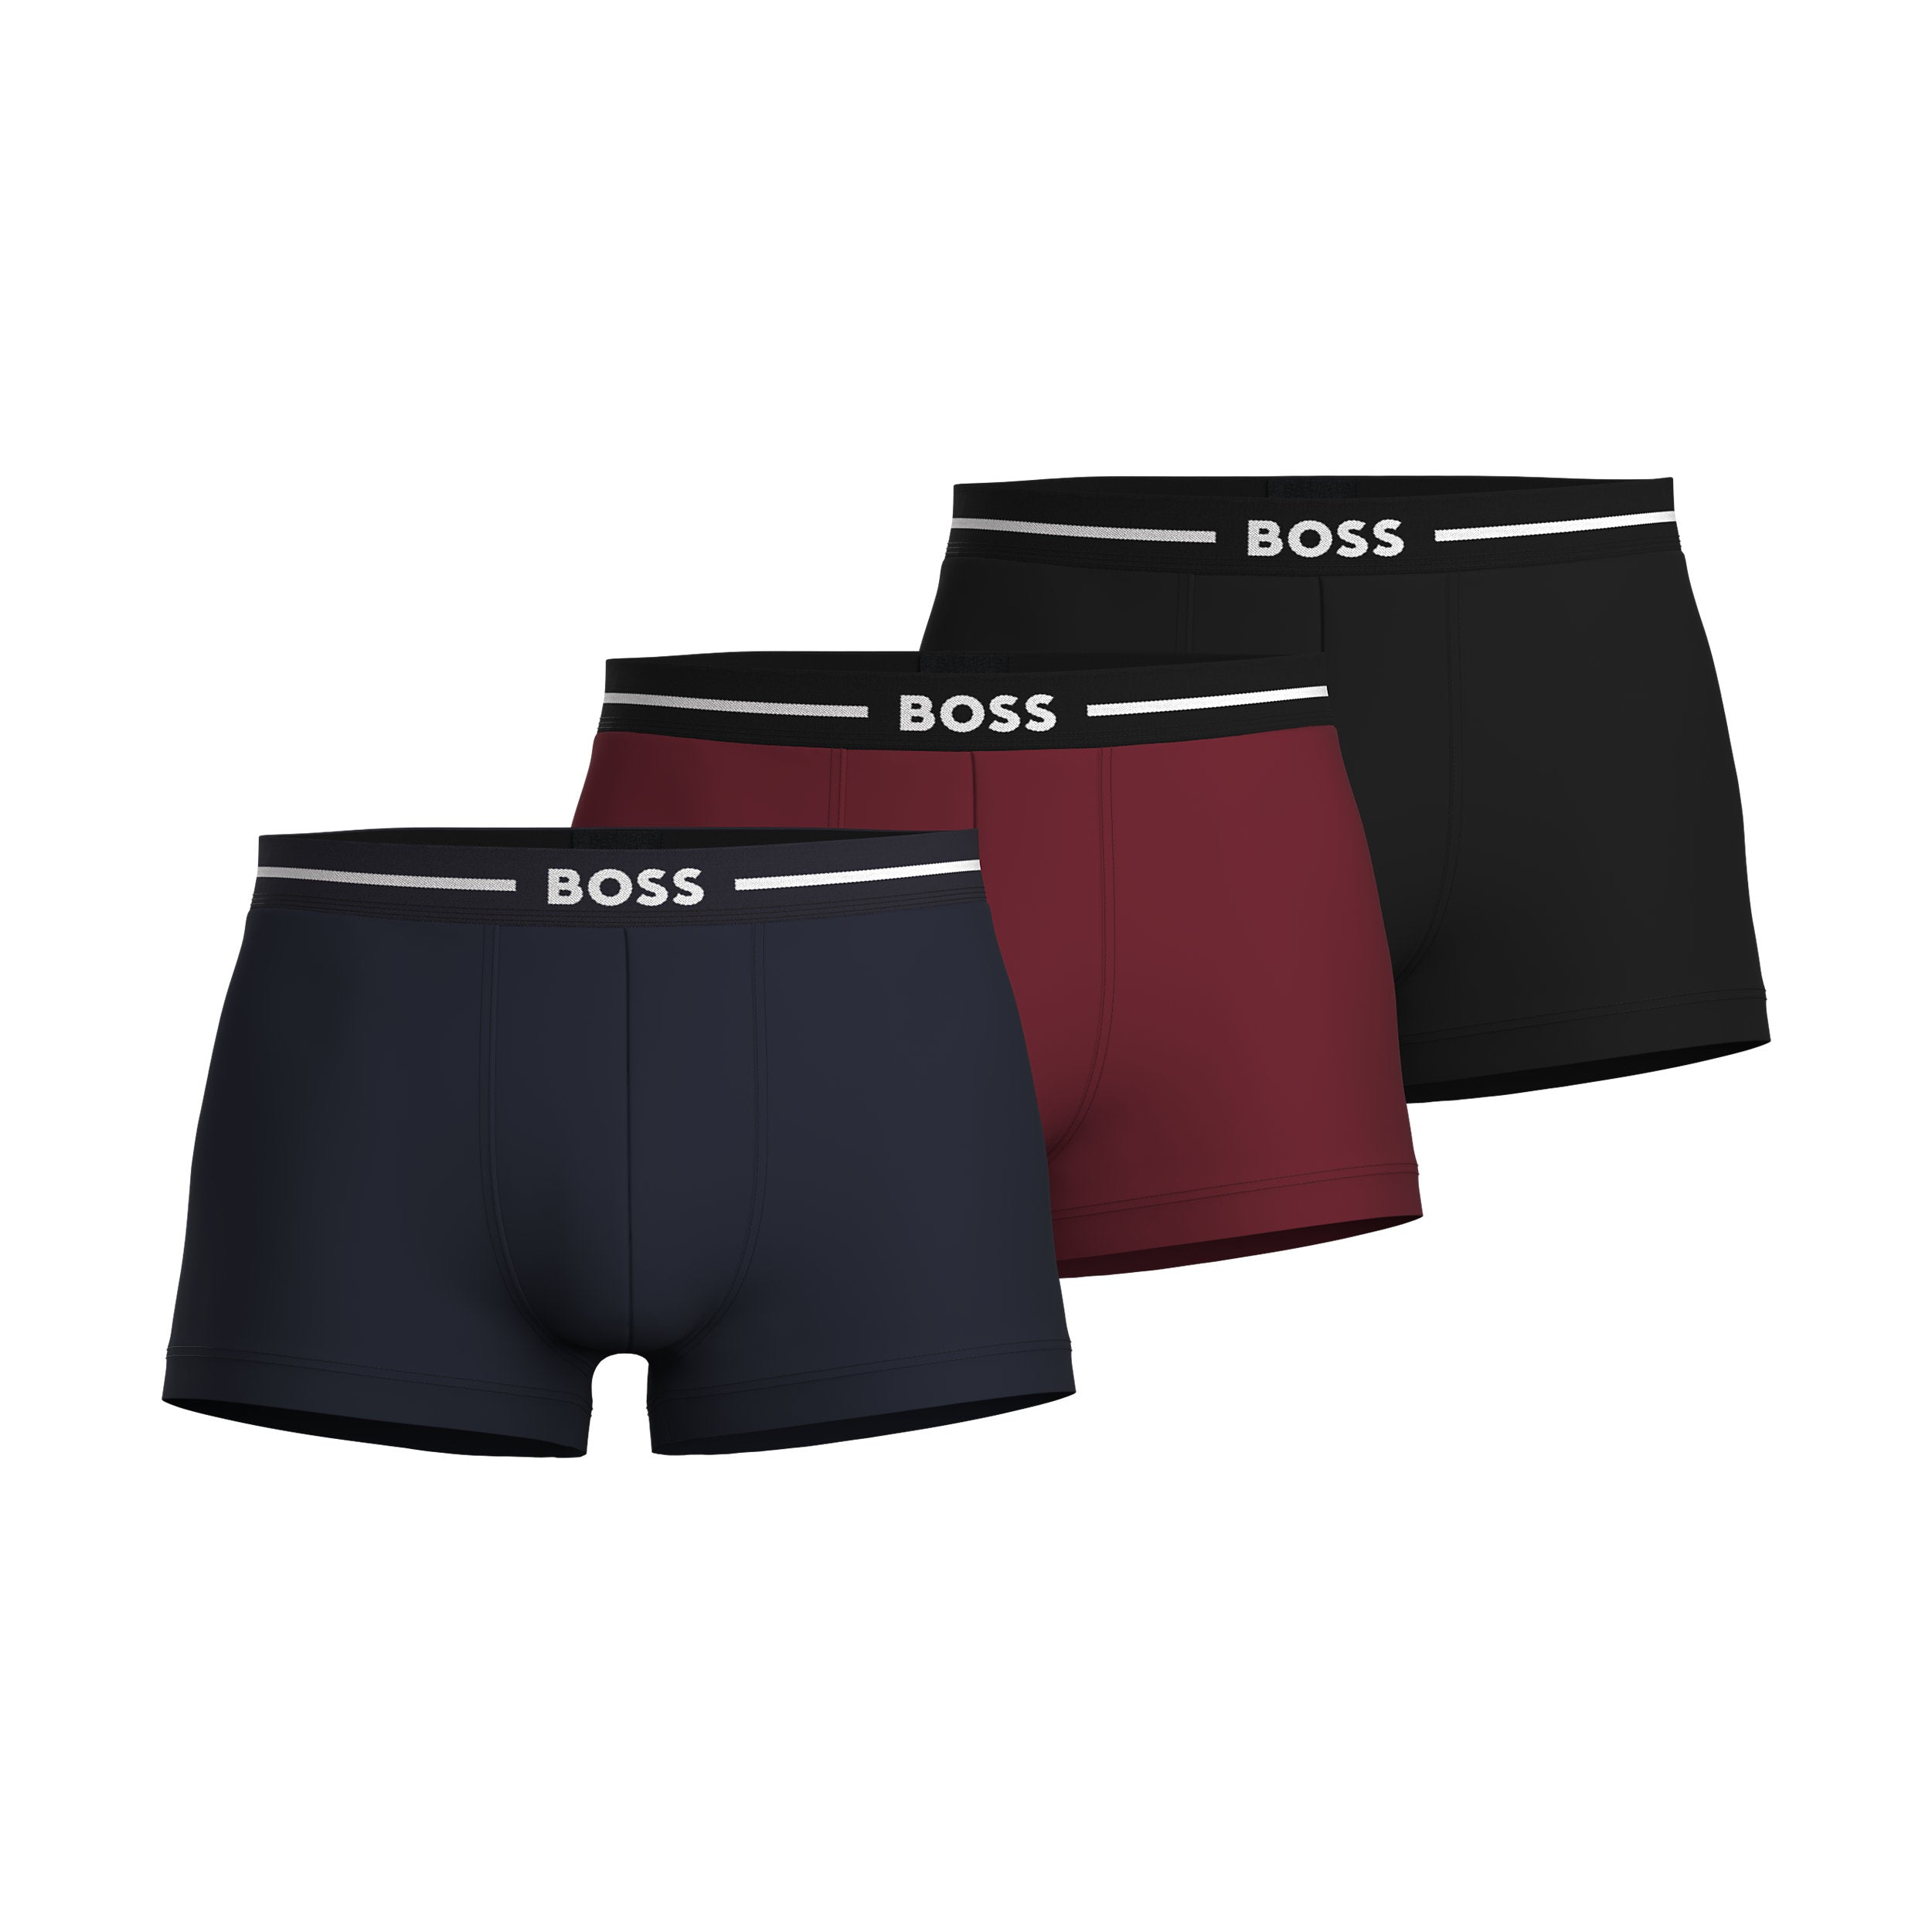 BOSS - 3-Pack Of Organic Stretch Cotton Trunks With Logo Waistbands 50499390 970